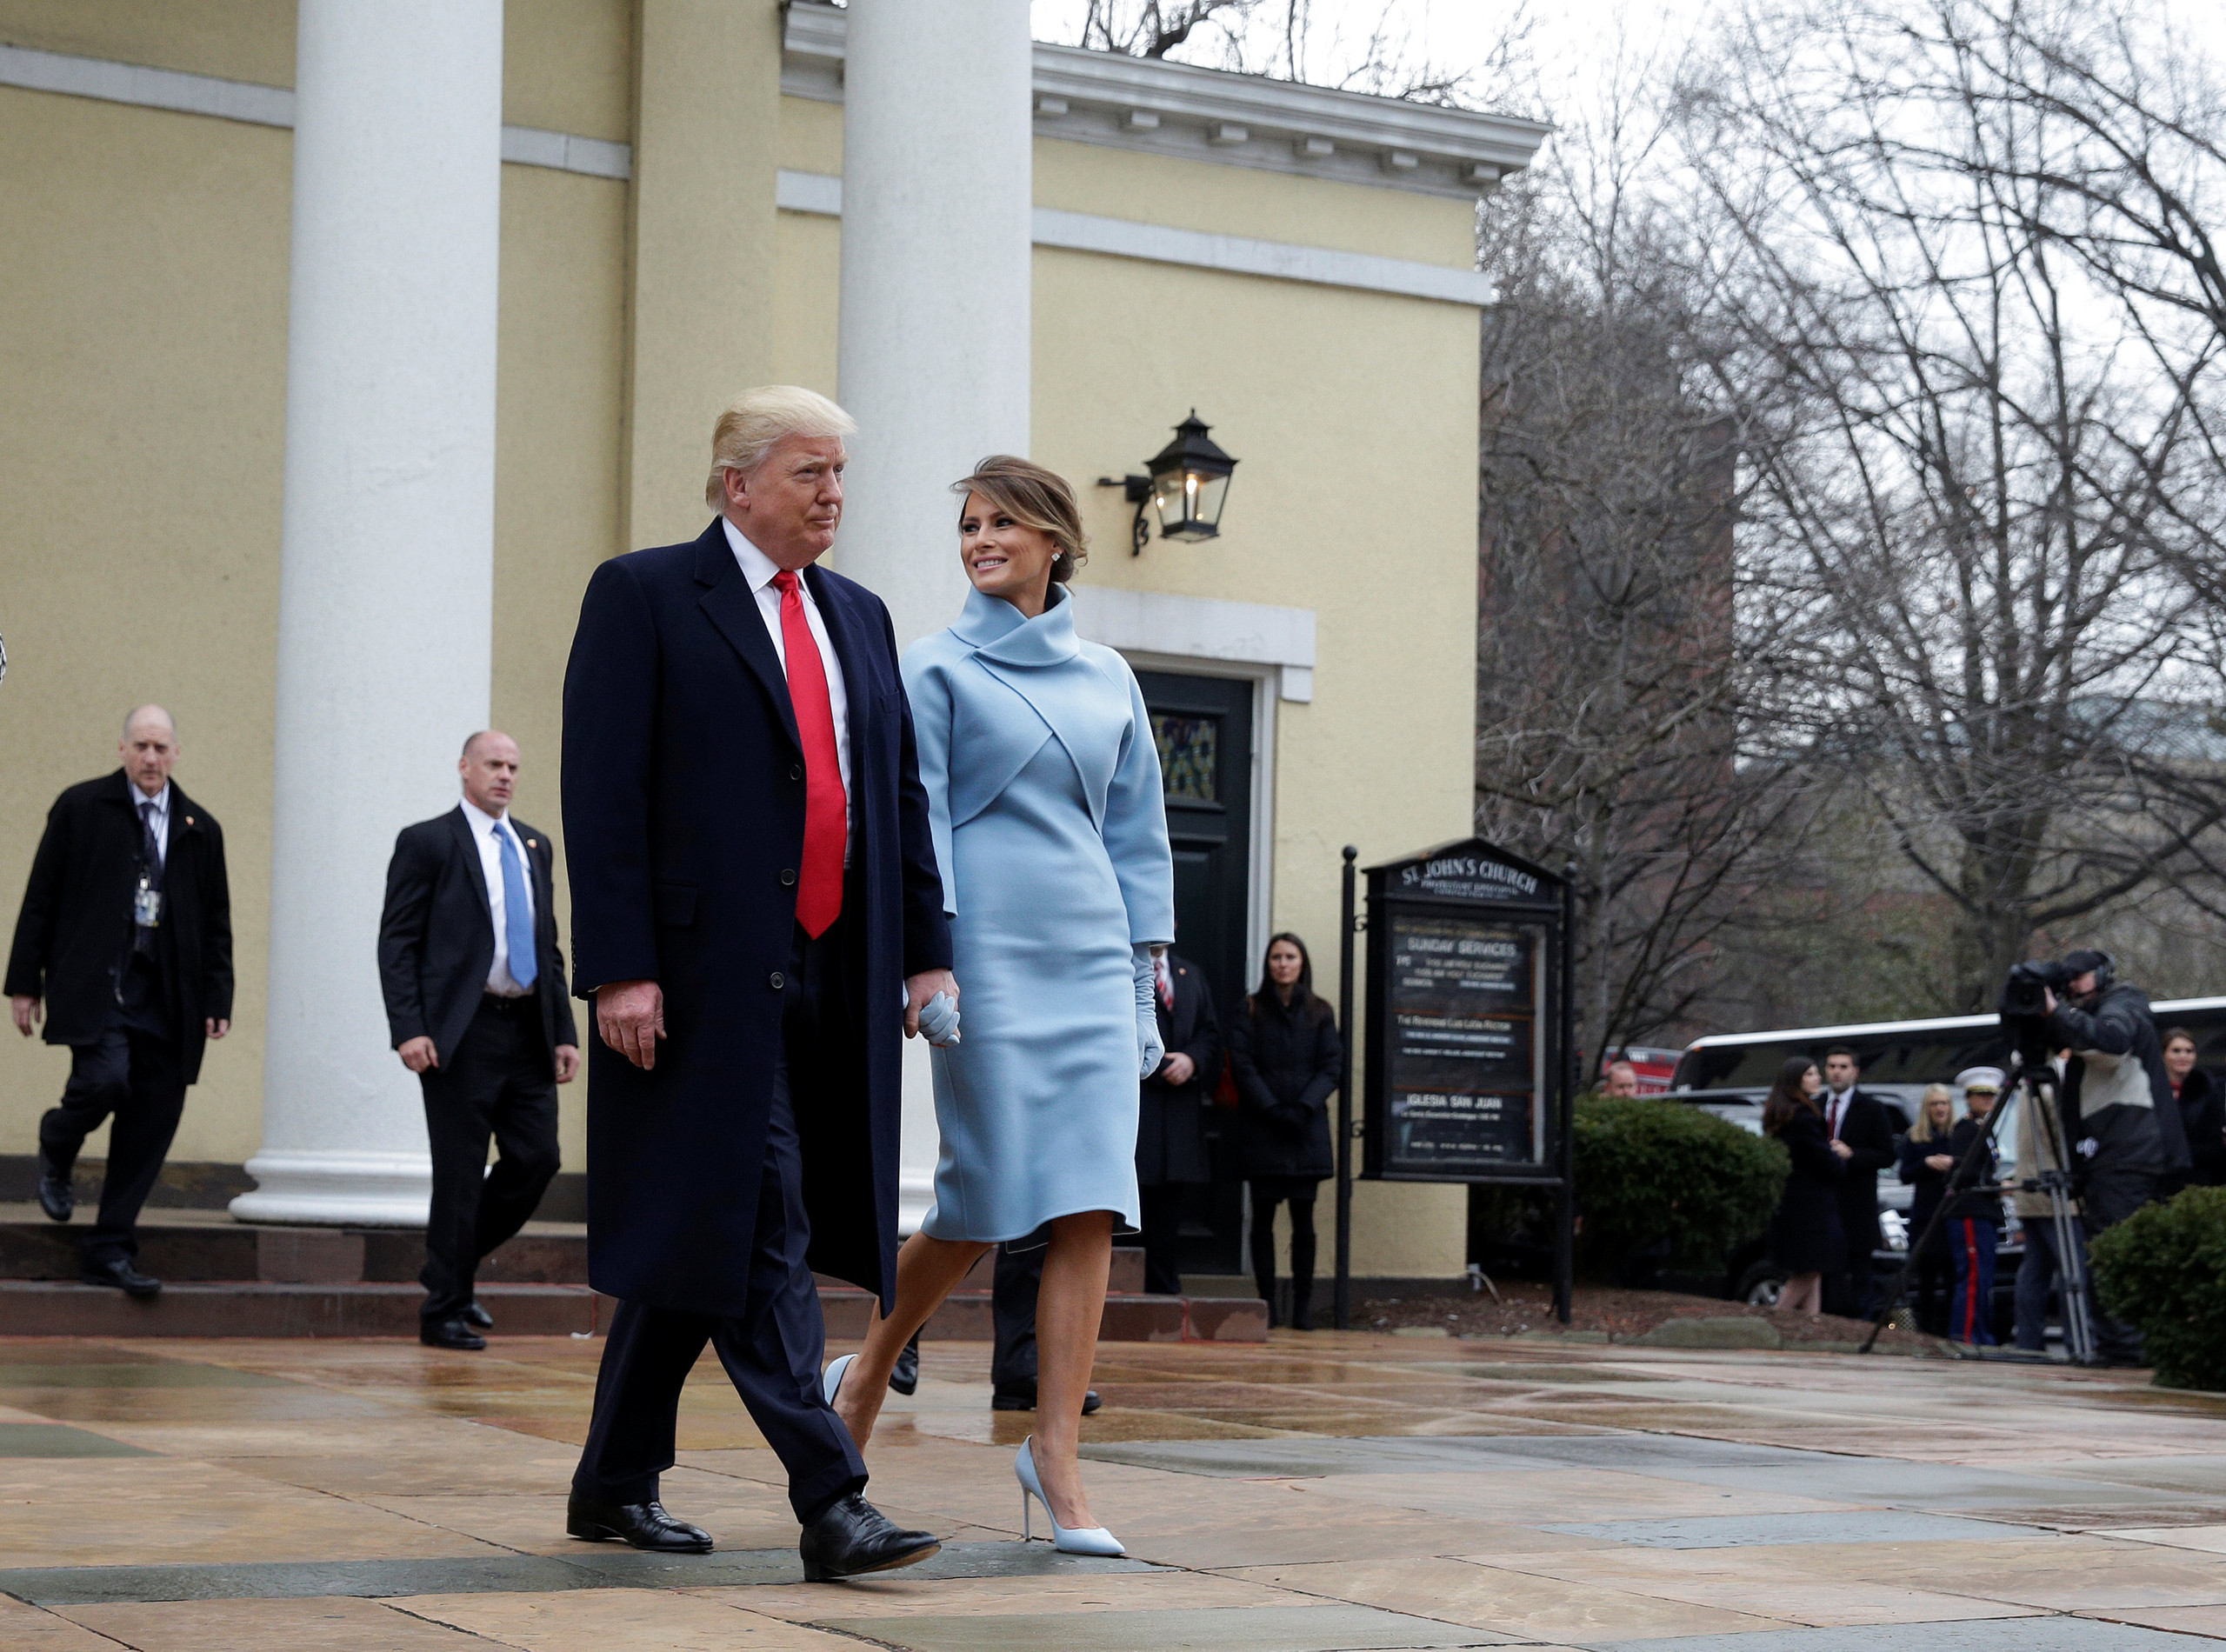 President-elect Donald Trump and his wife Melania depart from services at St. John's Church during his inauguration in Washington.